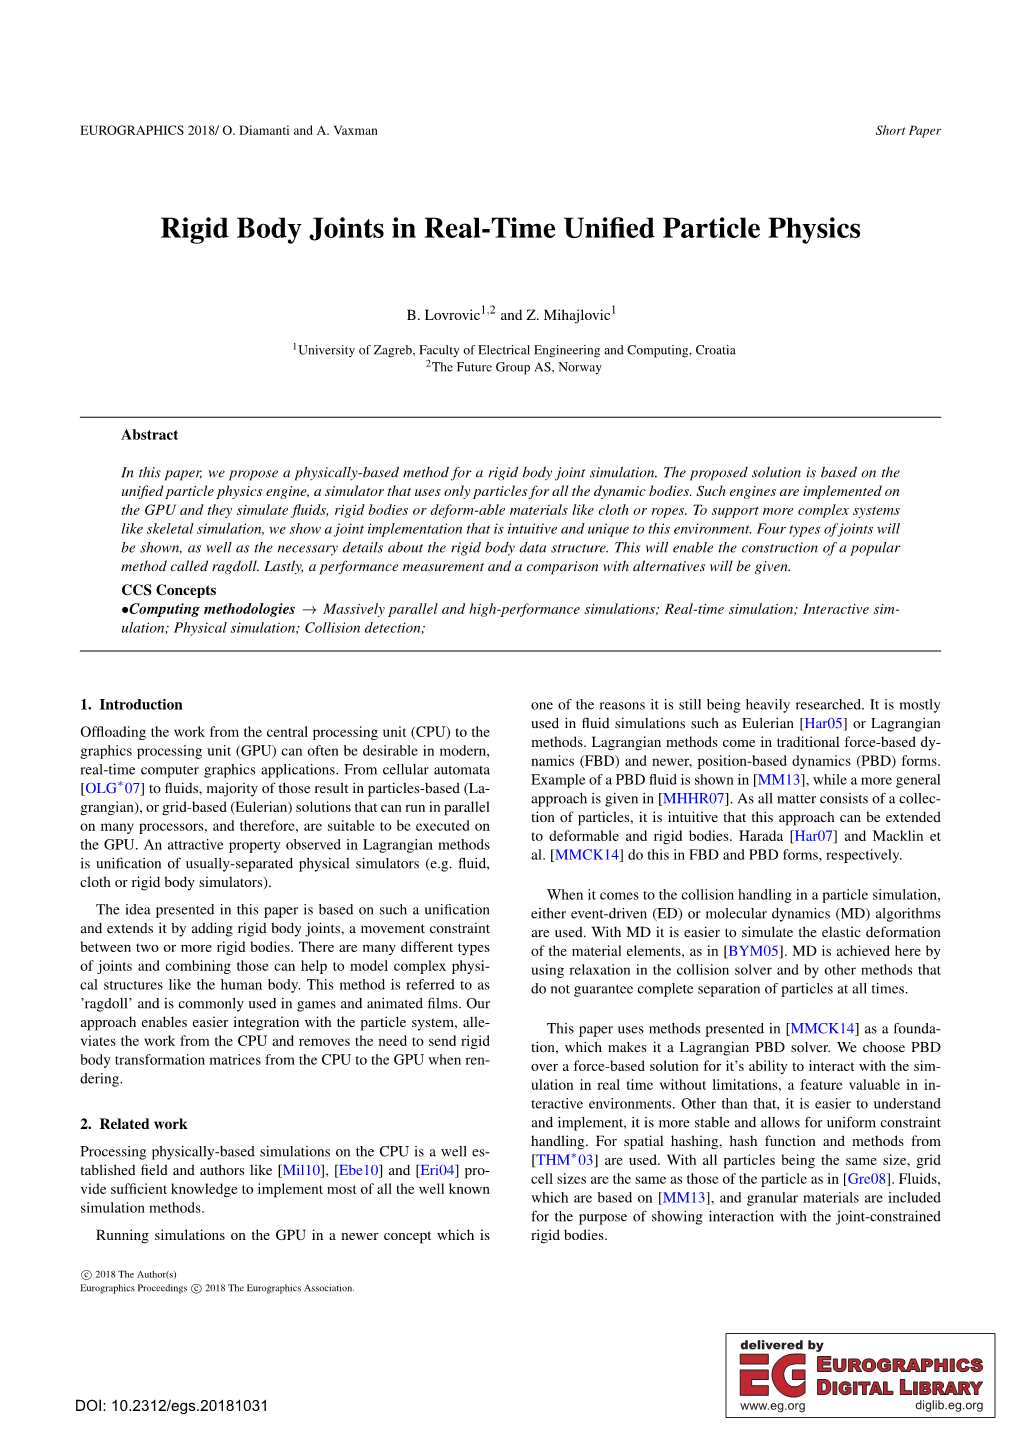 Rigid Body Joints in Real-Time Unified Particle Physics